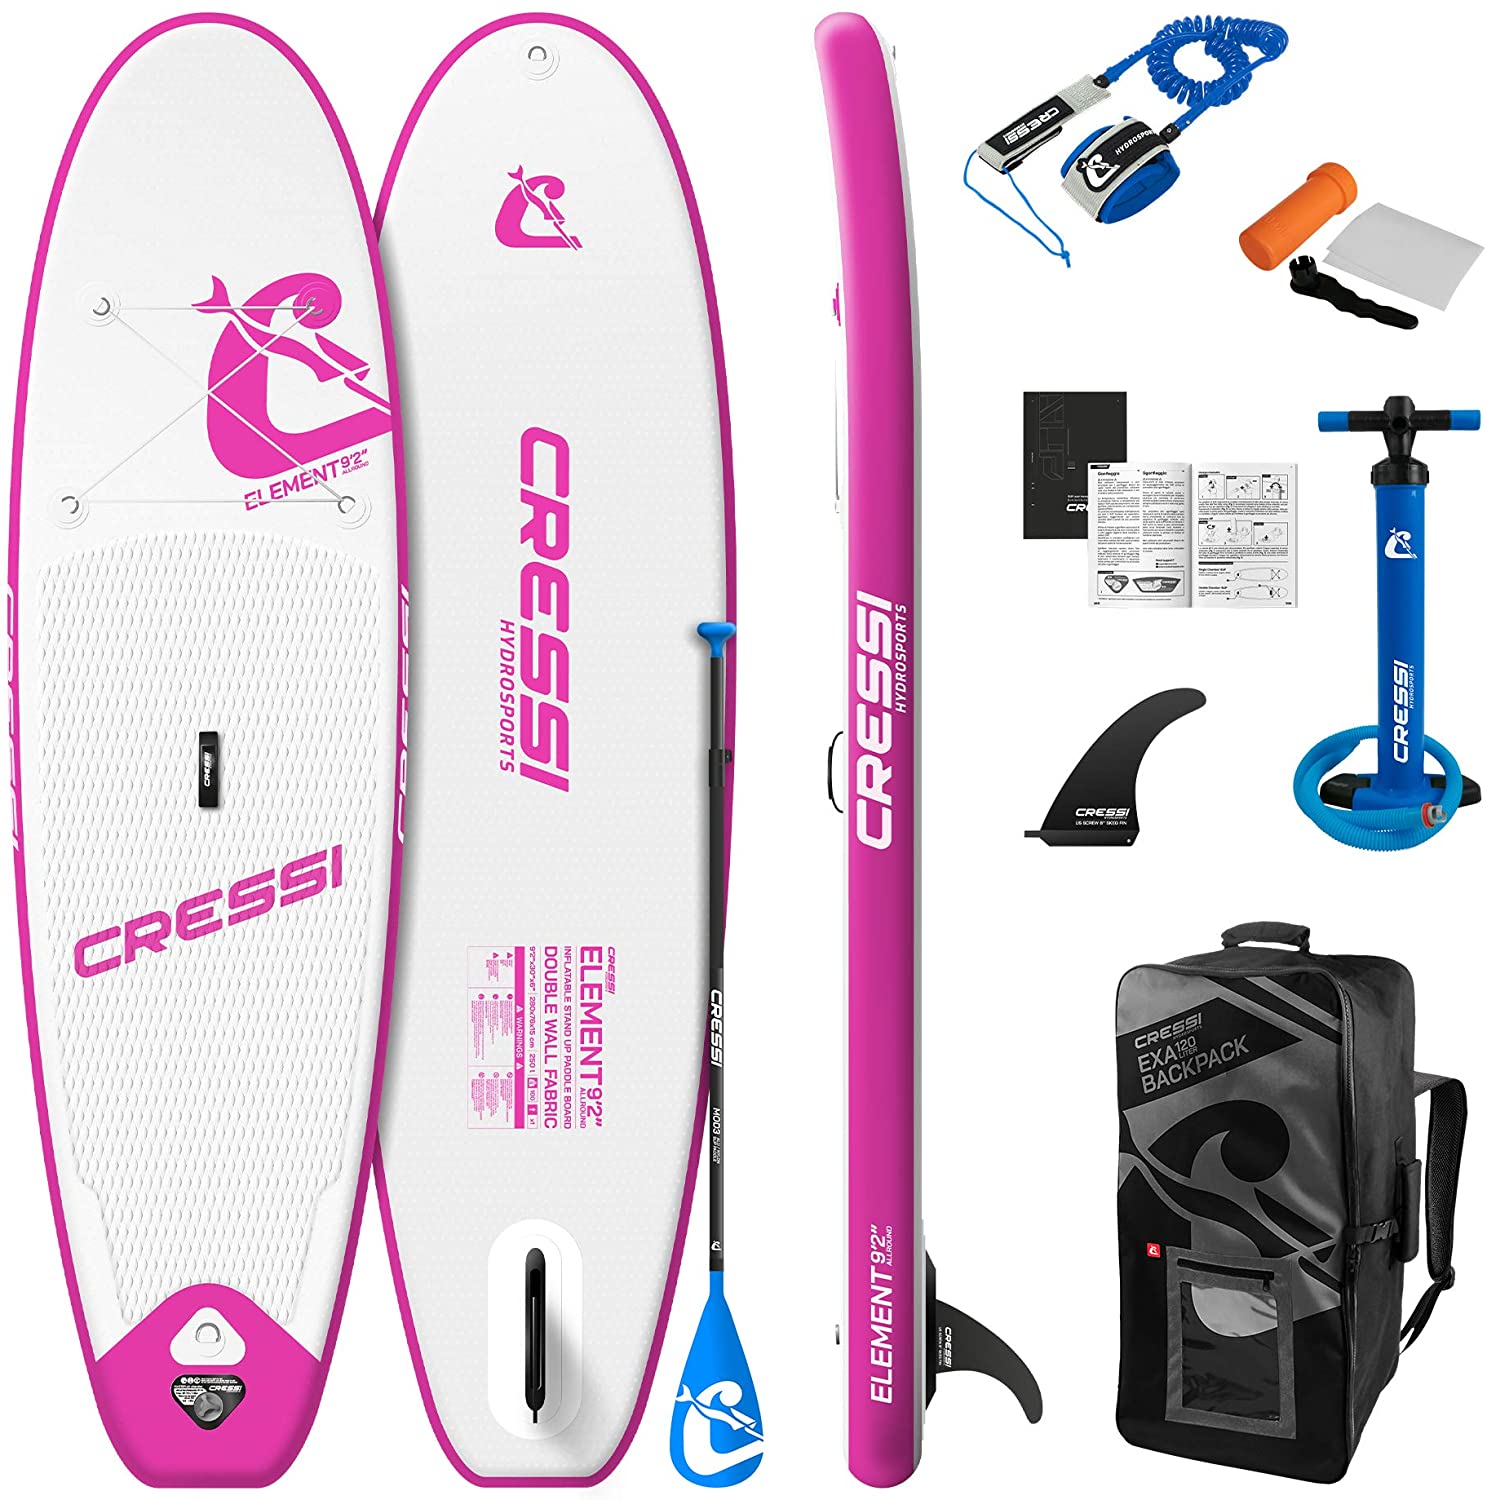 CRESSI ELEMENT ALL ROUND iSUP SET 9'2" SUP Stand Up Paddling Board